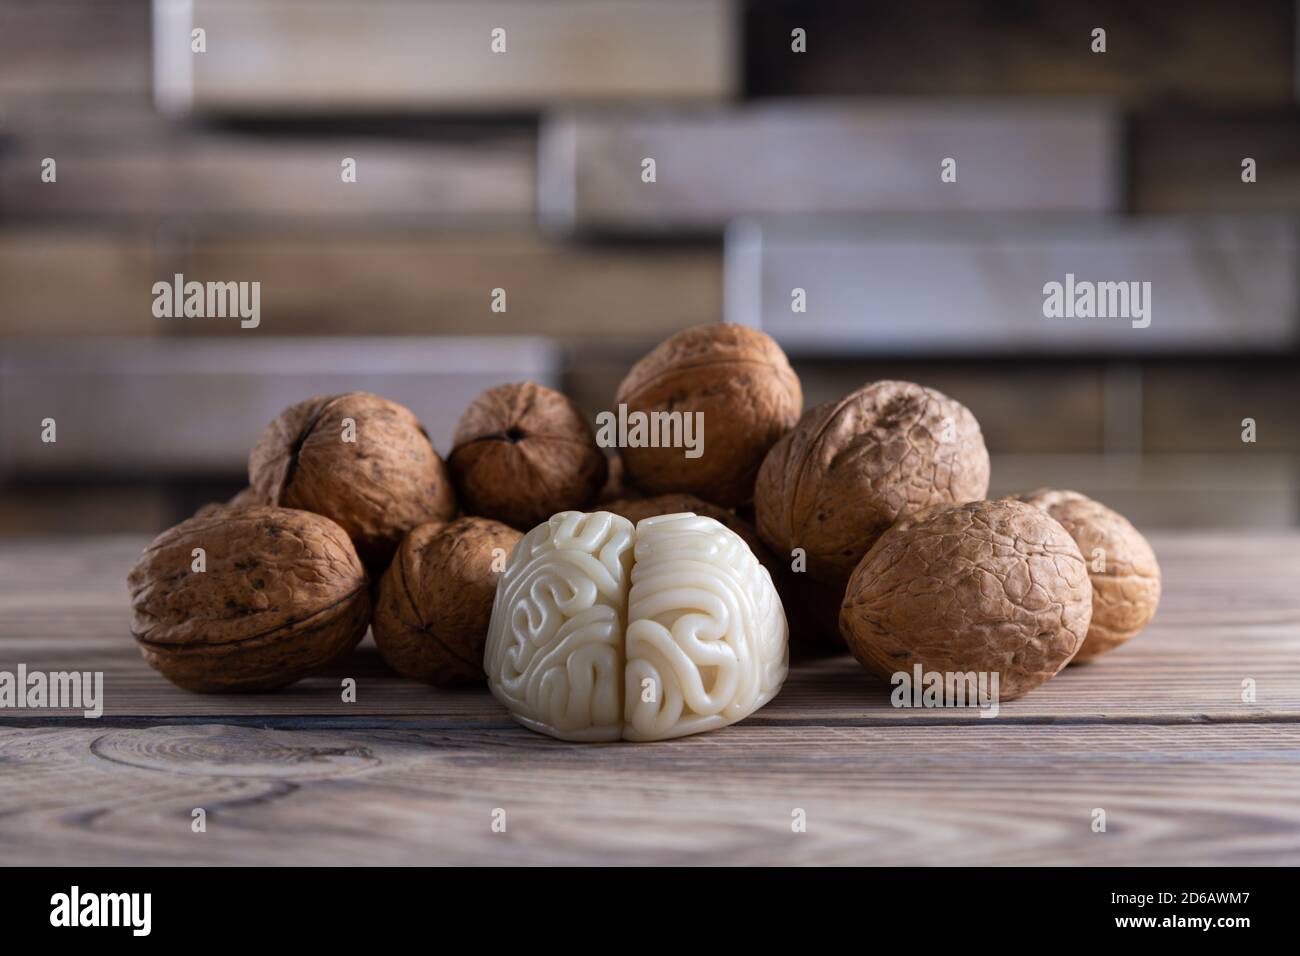 Walnuts like healthy food for the brain. Shape of human brain is surrounded by walnut kernels. It symbolizes how brain similarity with walnuts and Stock Photo